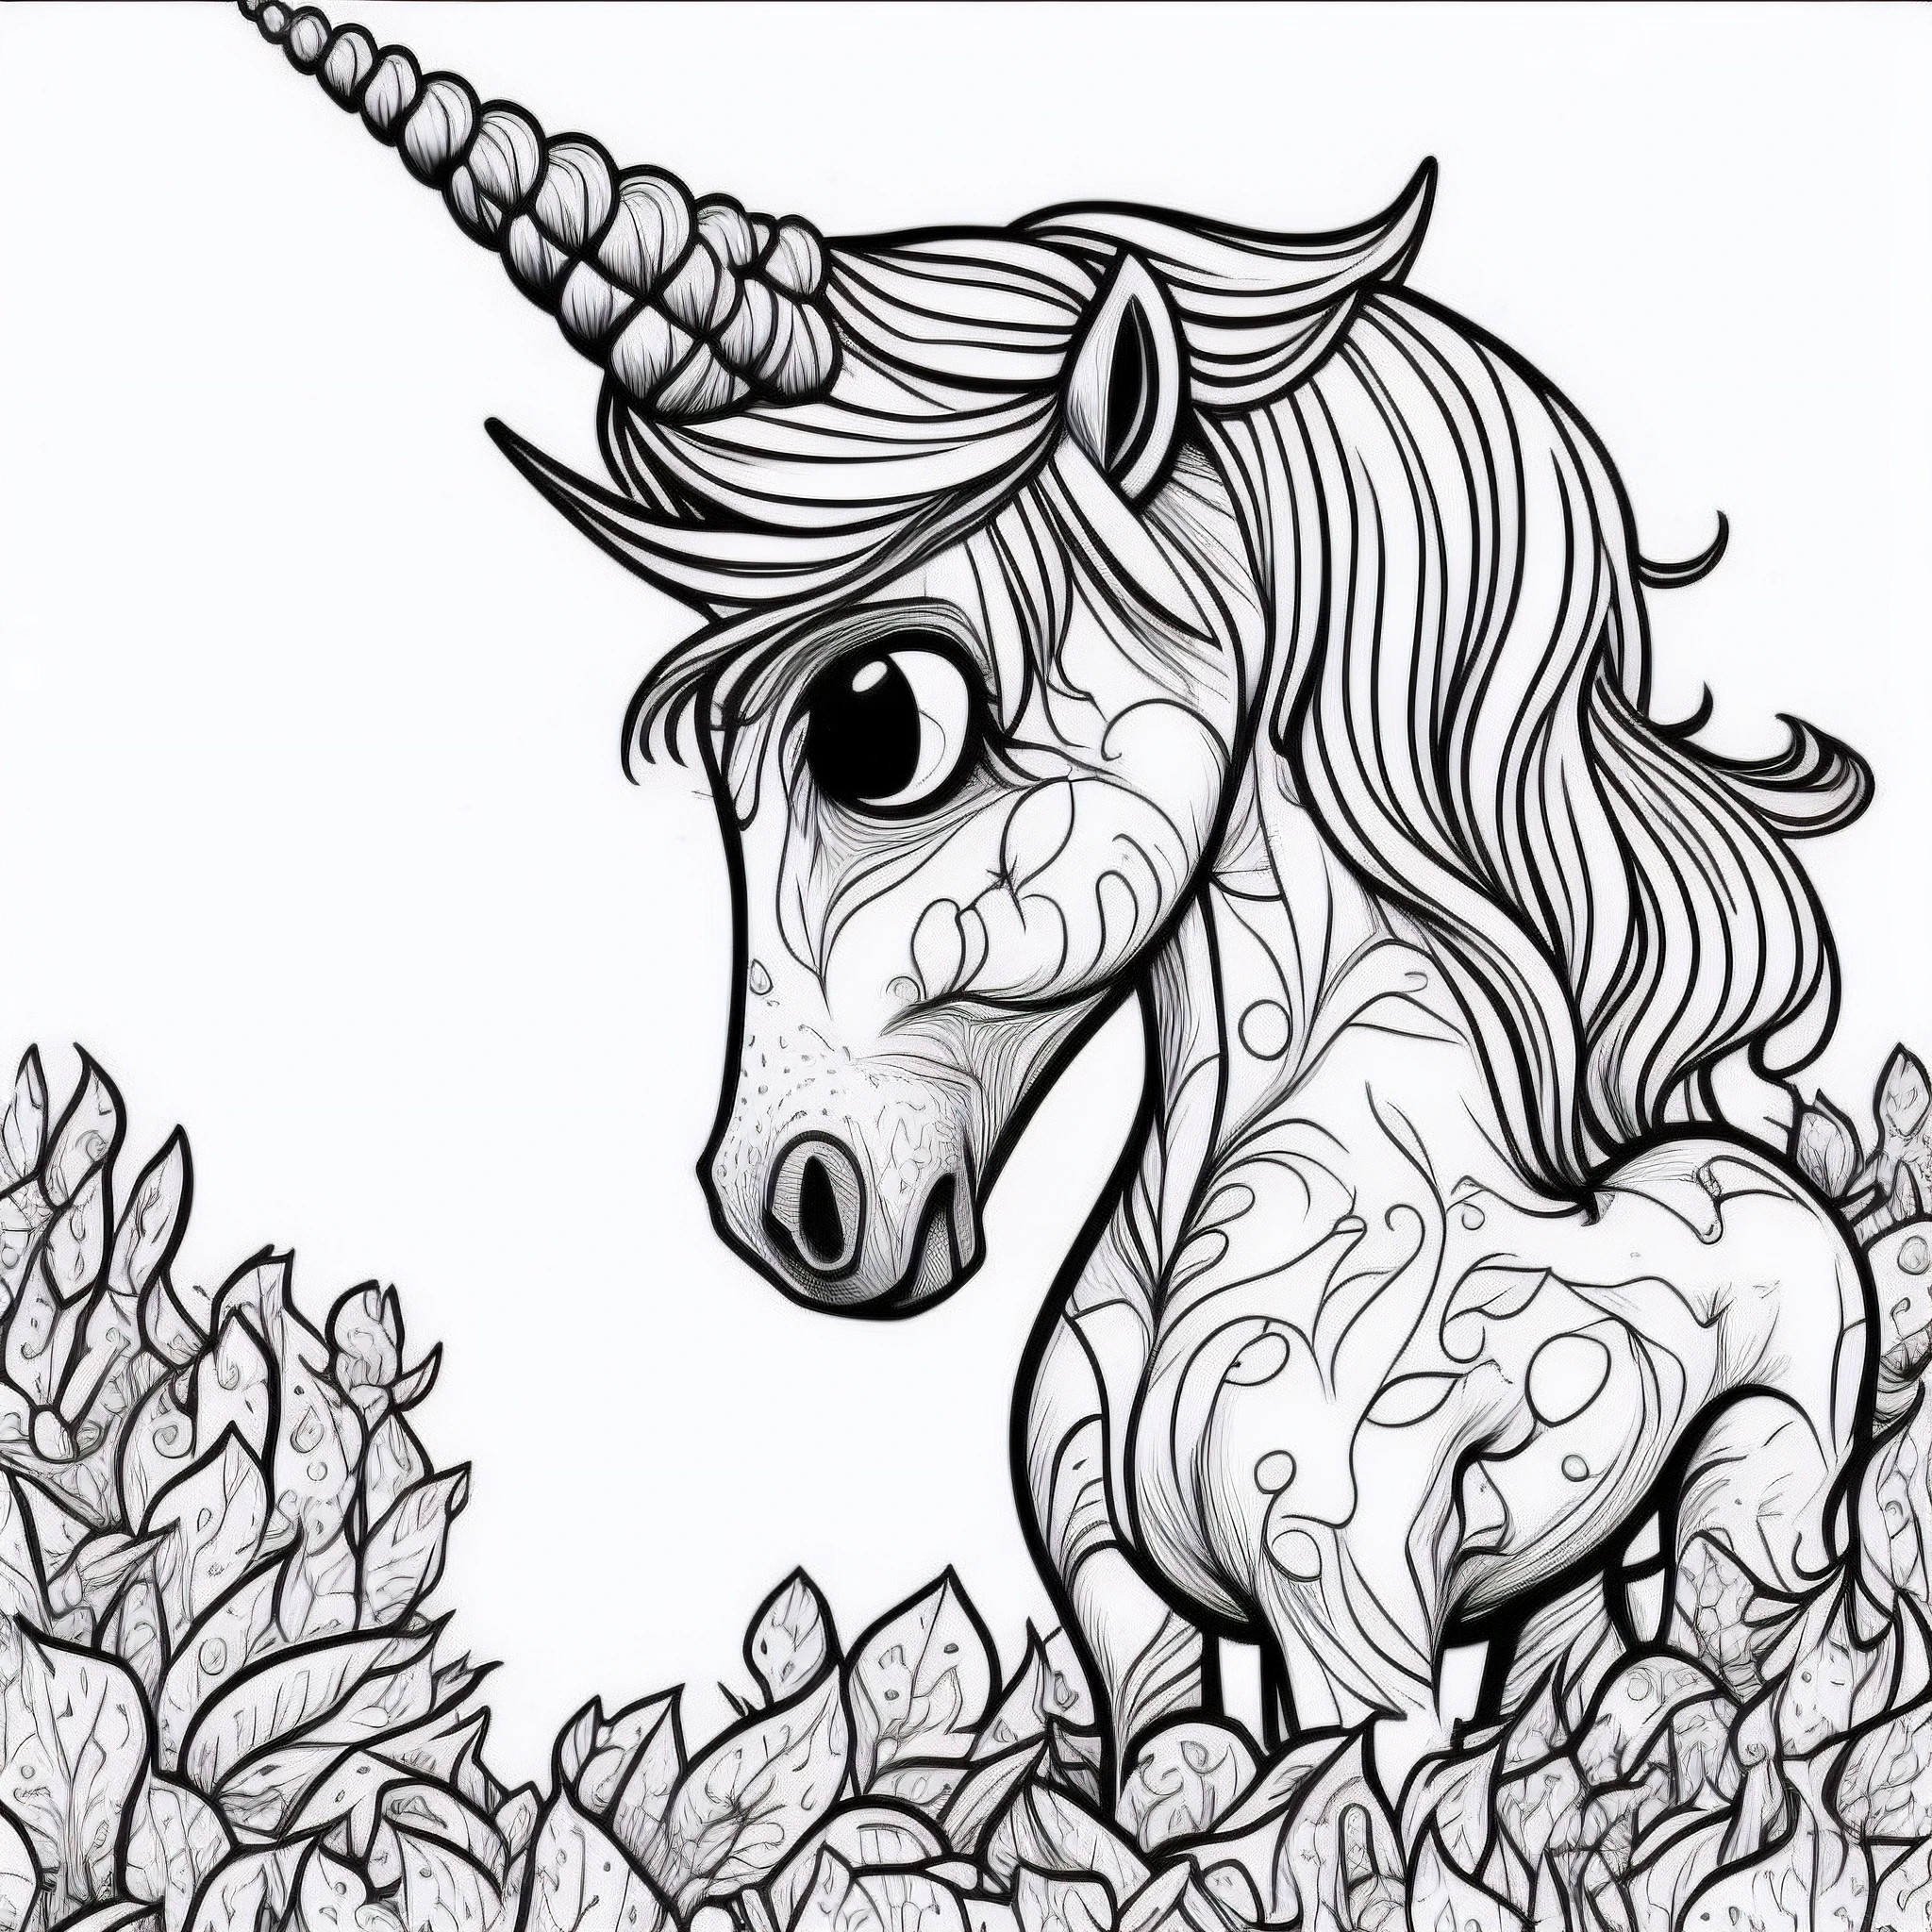 (sad unicorn), COLR_001, intricate, cute, simple, white background, black and white, thin lines